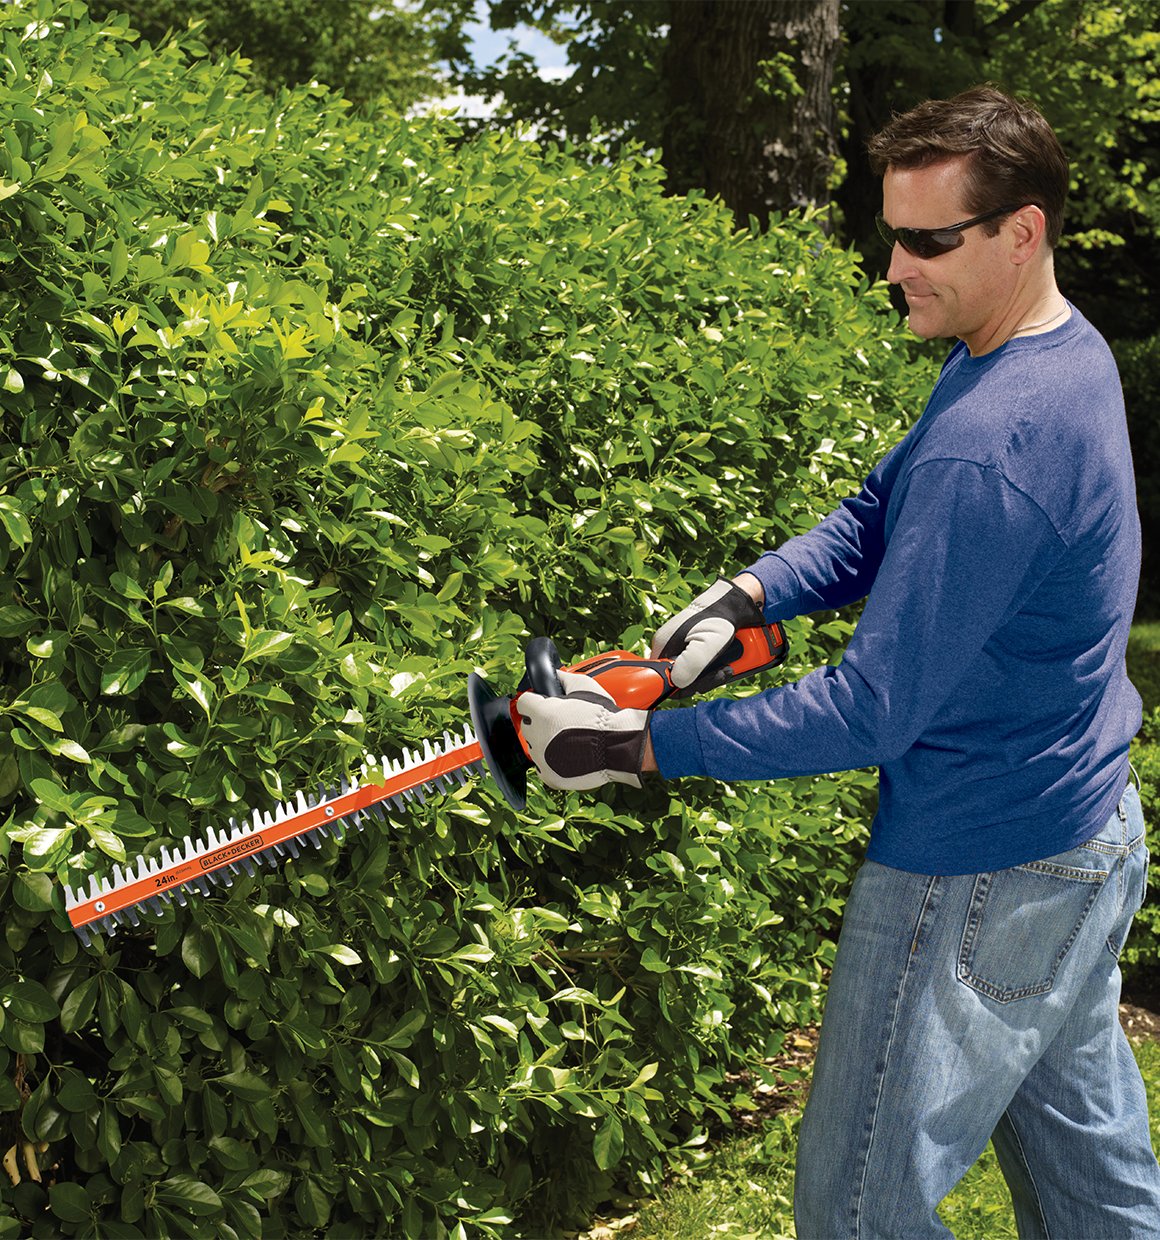 Black & Decker 24 In. 40V Lithium Ion Cordless Hedge Trimmer